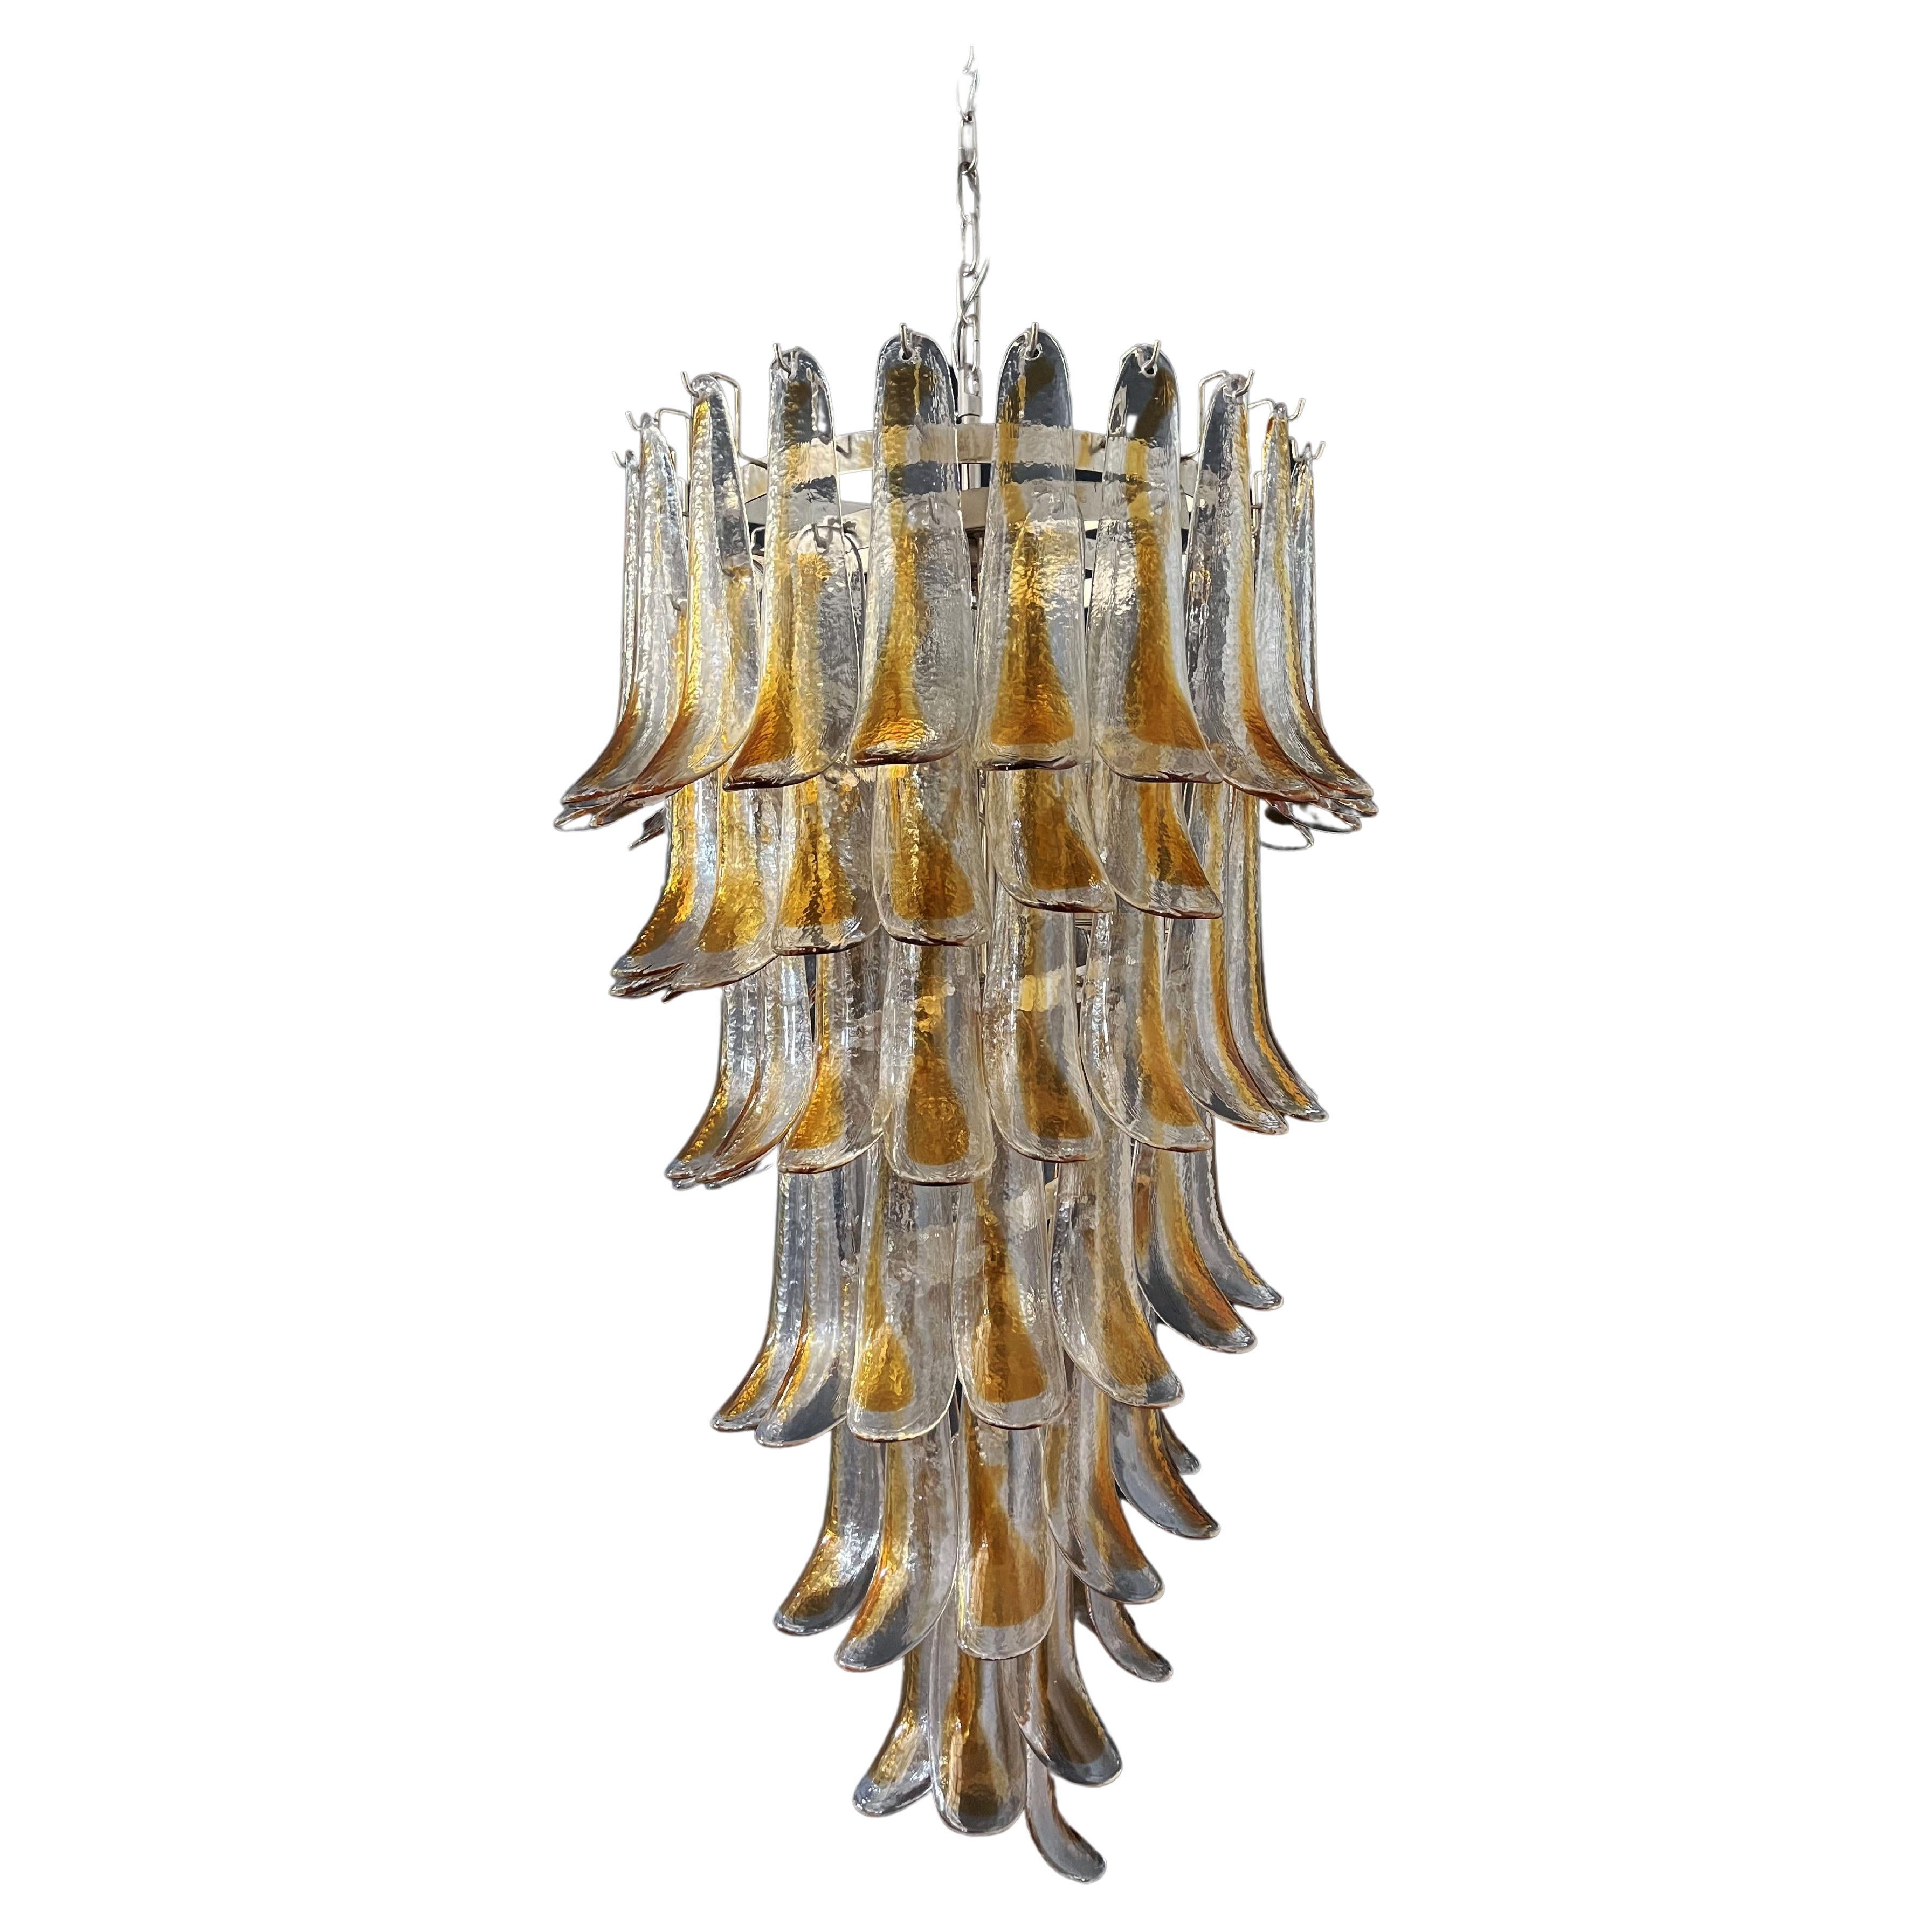 Huge Italian Murano Glass Spiral Chandelier, 83 Amber and Clear Glass Petals For Sale